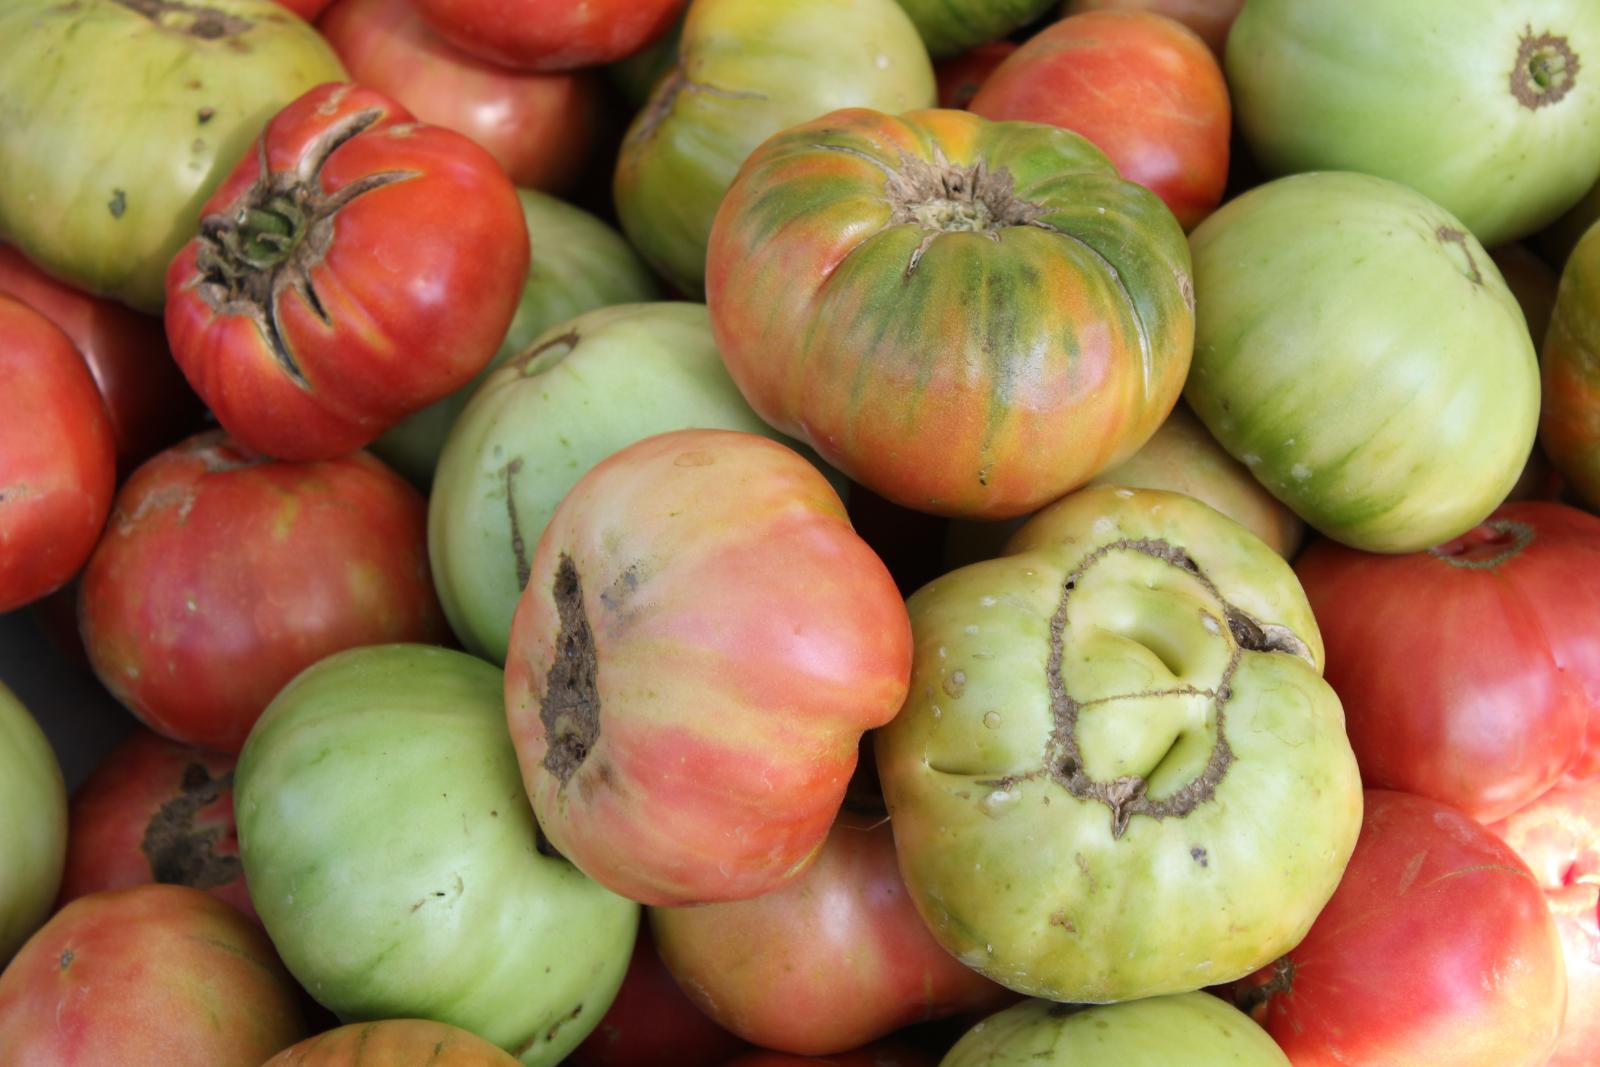 Are fruit tomatoes. Tomato Pulp. Томат по английски. In the Village Fruits Tomato.